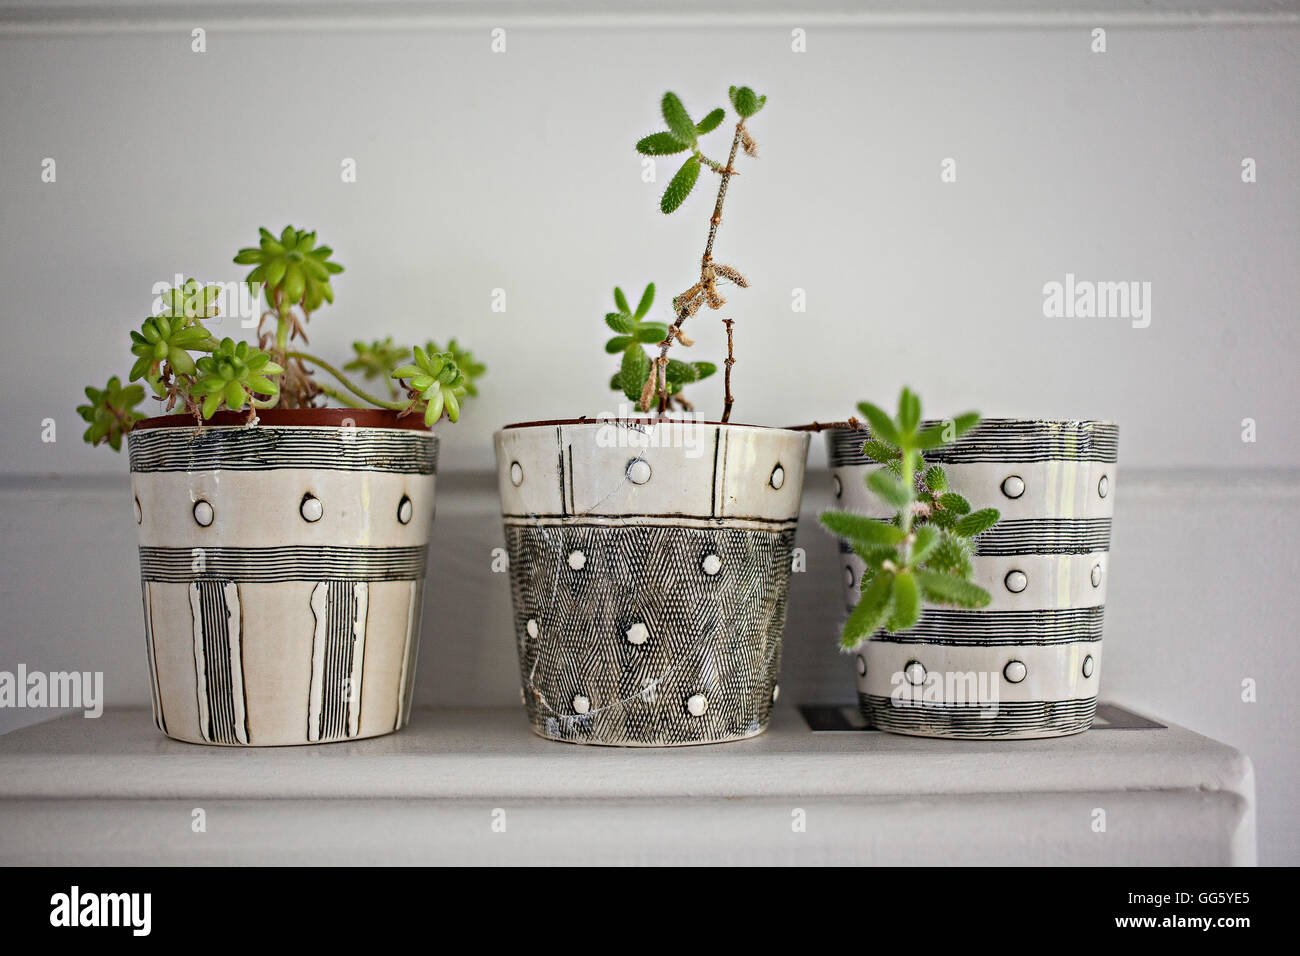 Potted plants on table at home Stock Photo